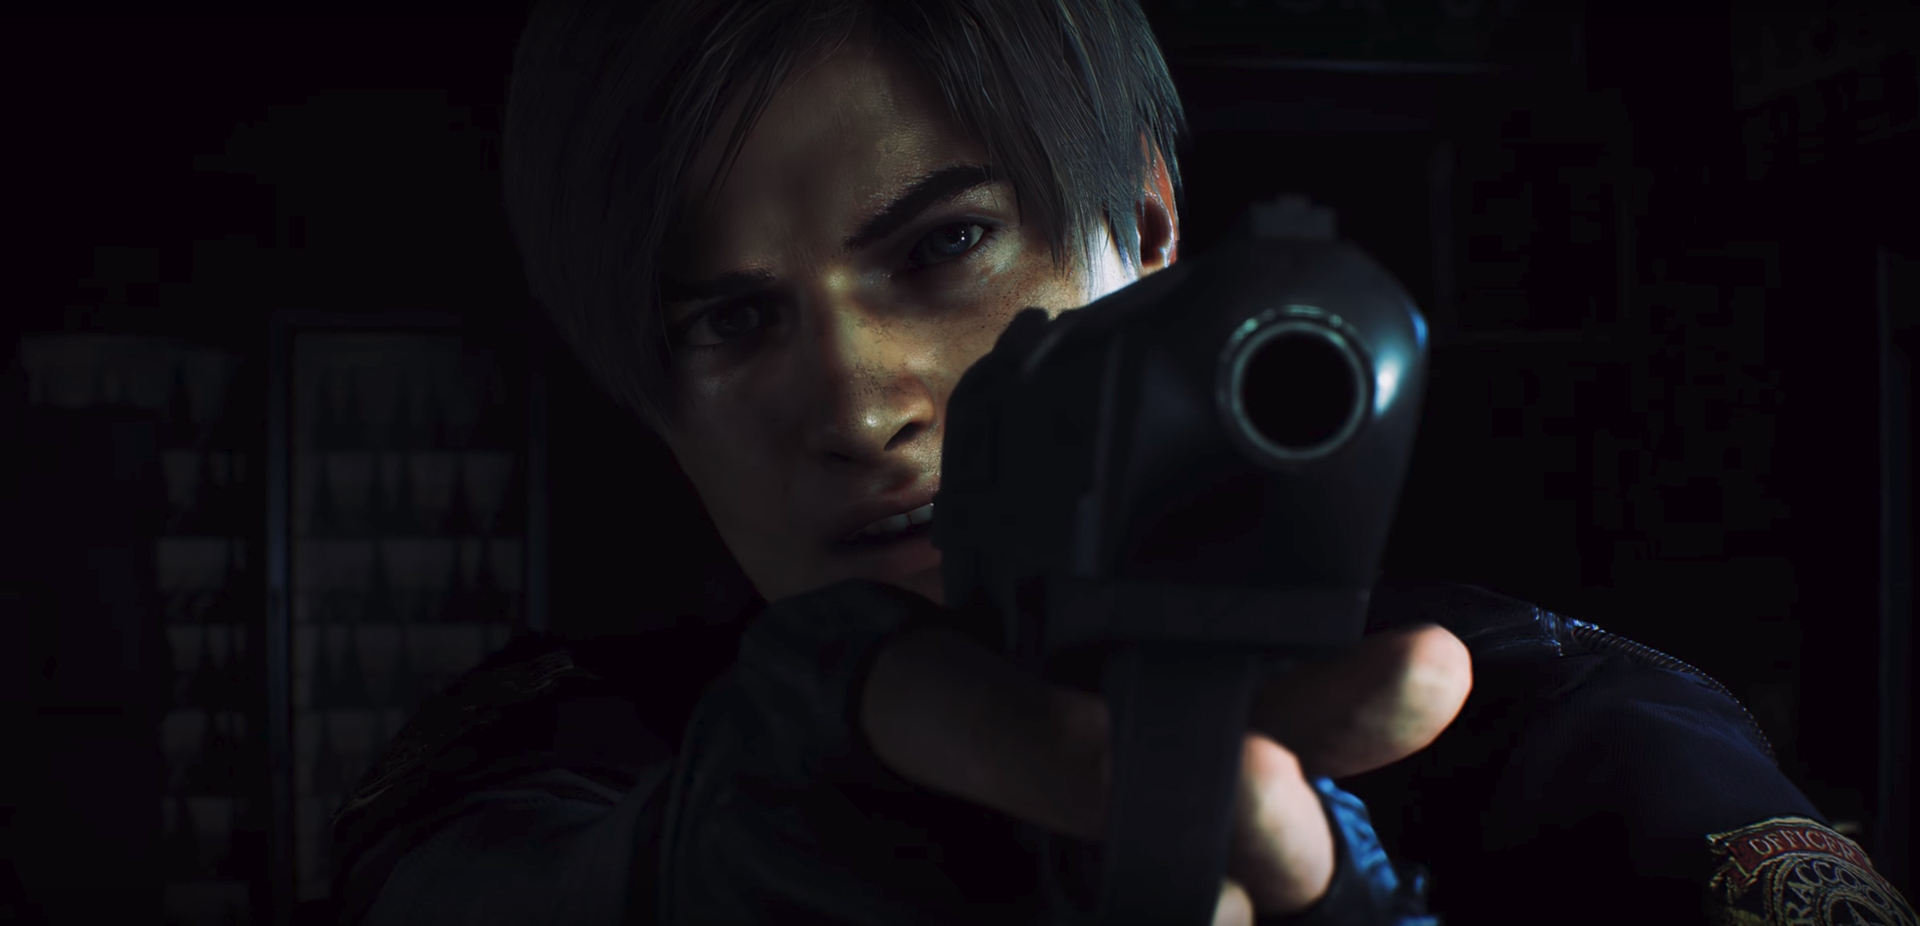 Resident Evil 2 Trophies Have Leaked, Here's The Full List (Including Hidden Trophies)